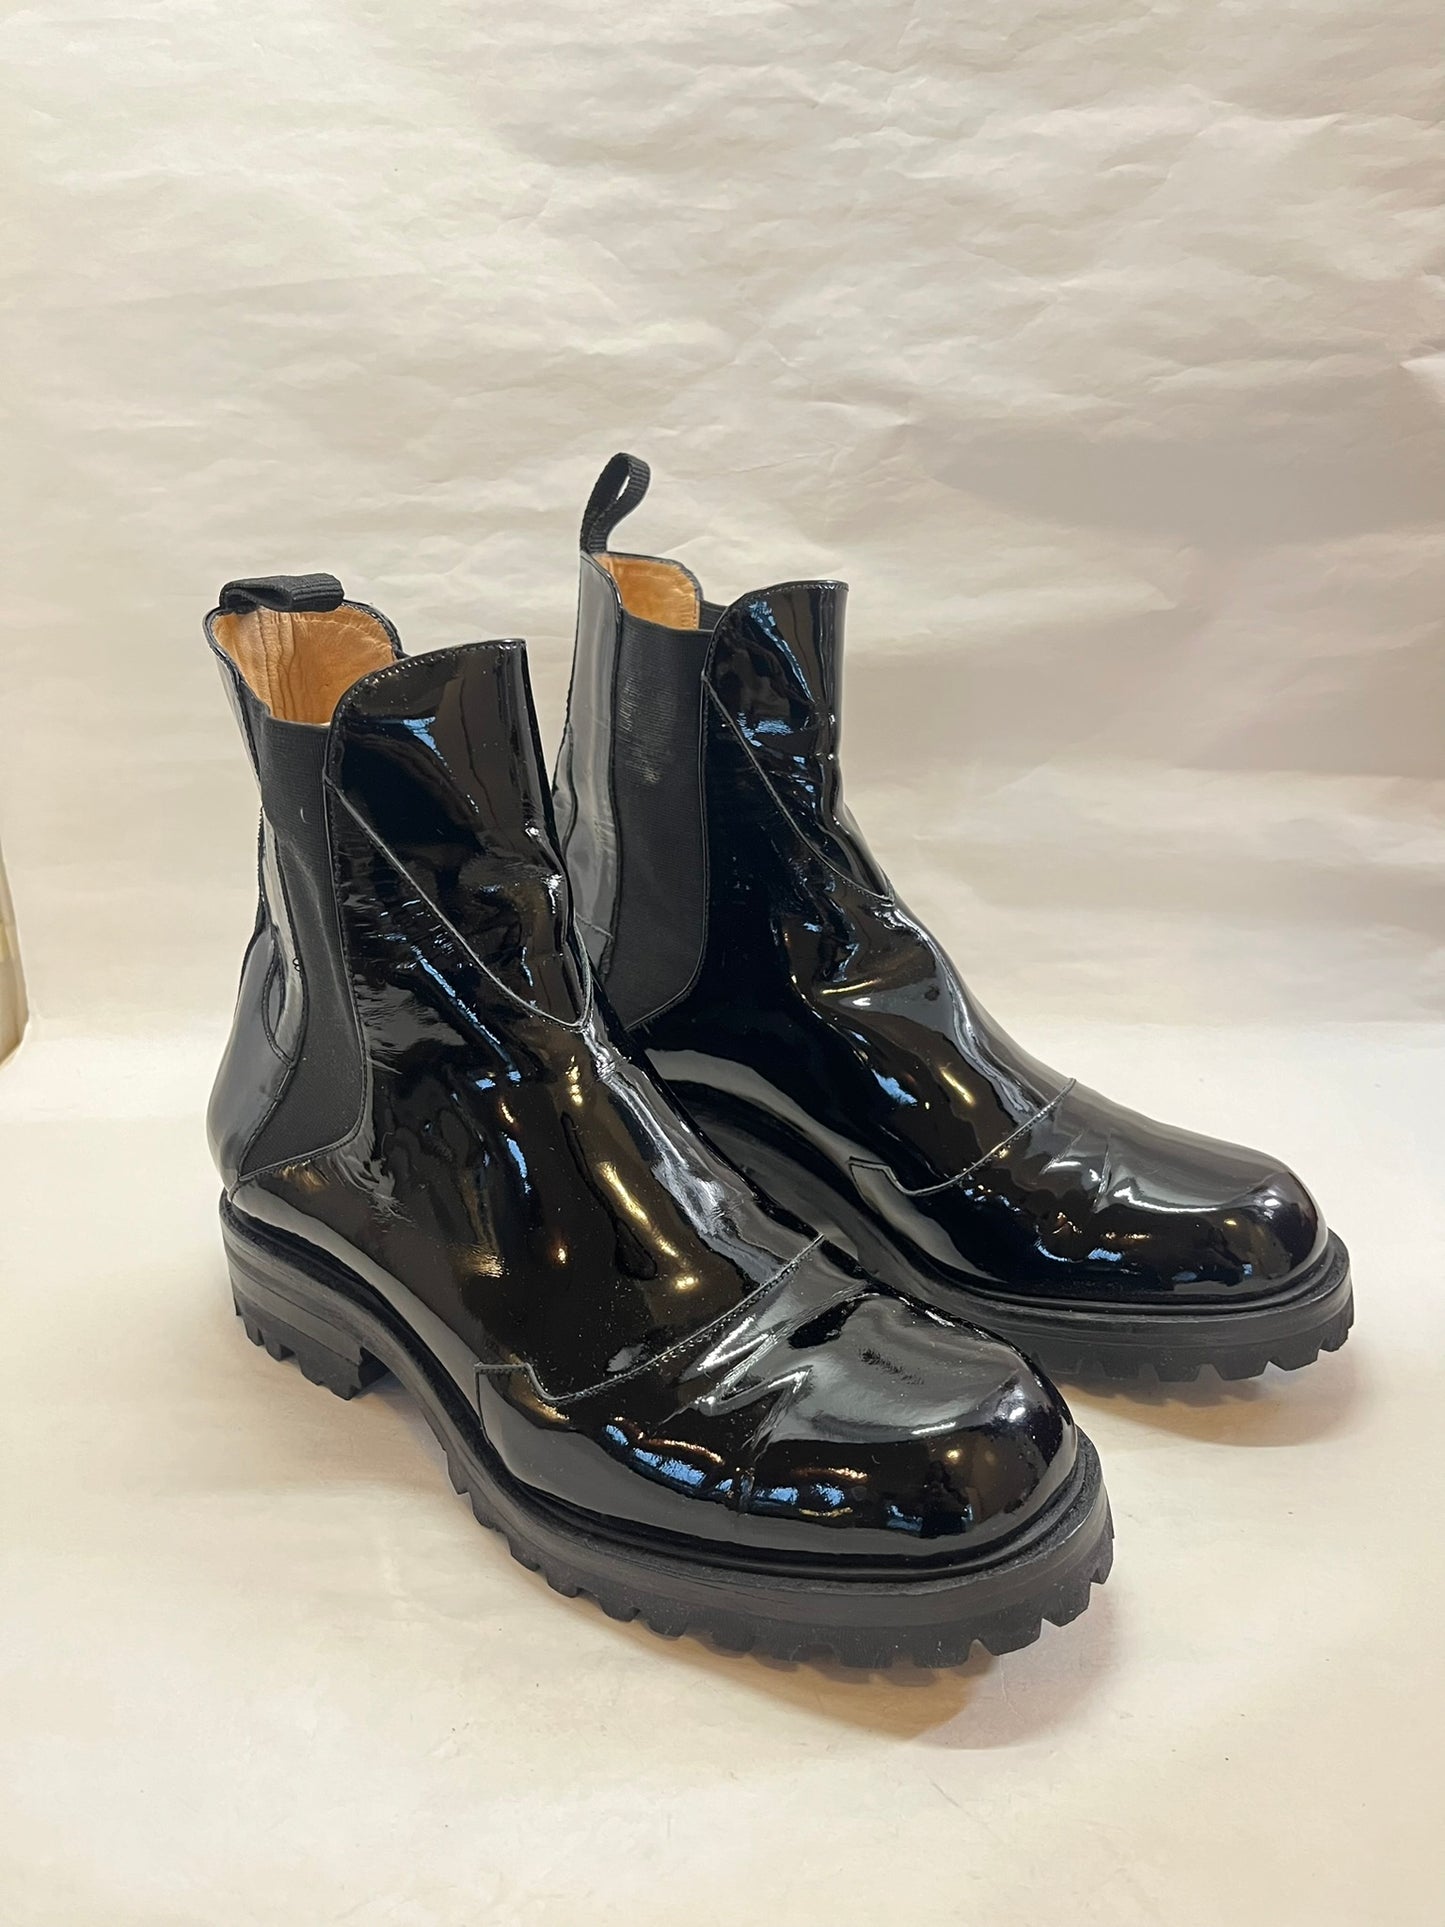 Nerea Boot in Black Patent Size 41